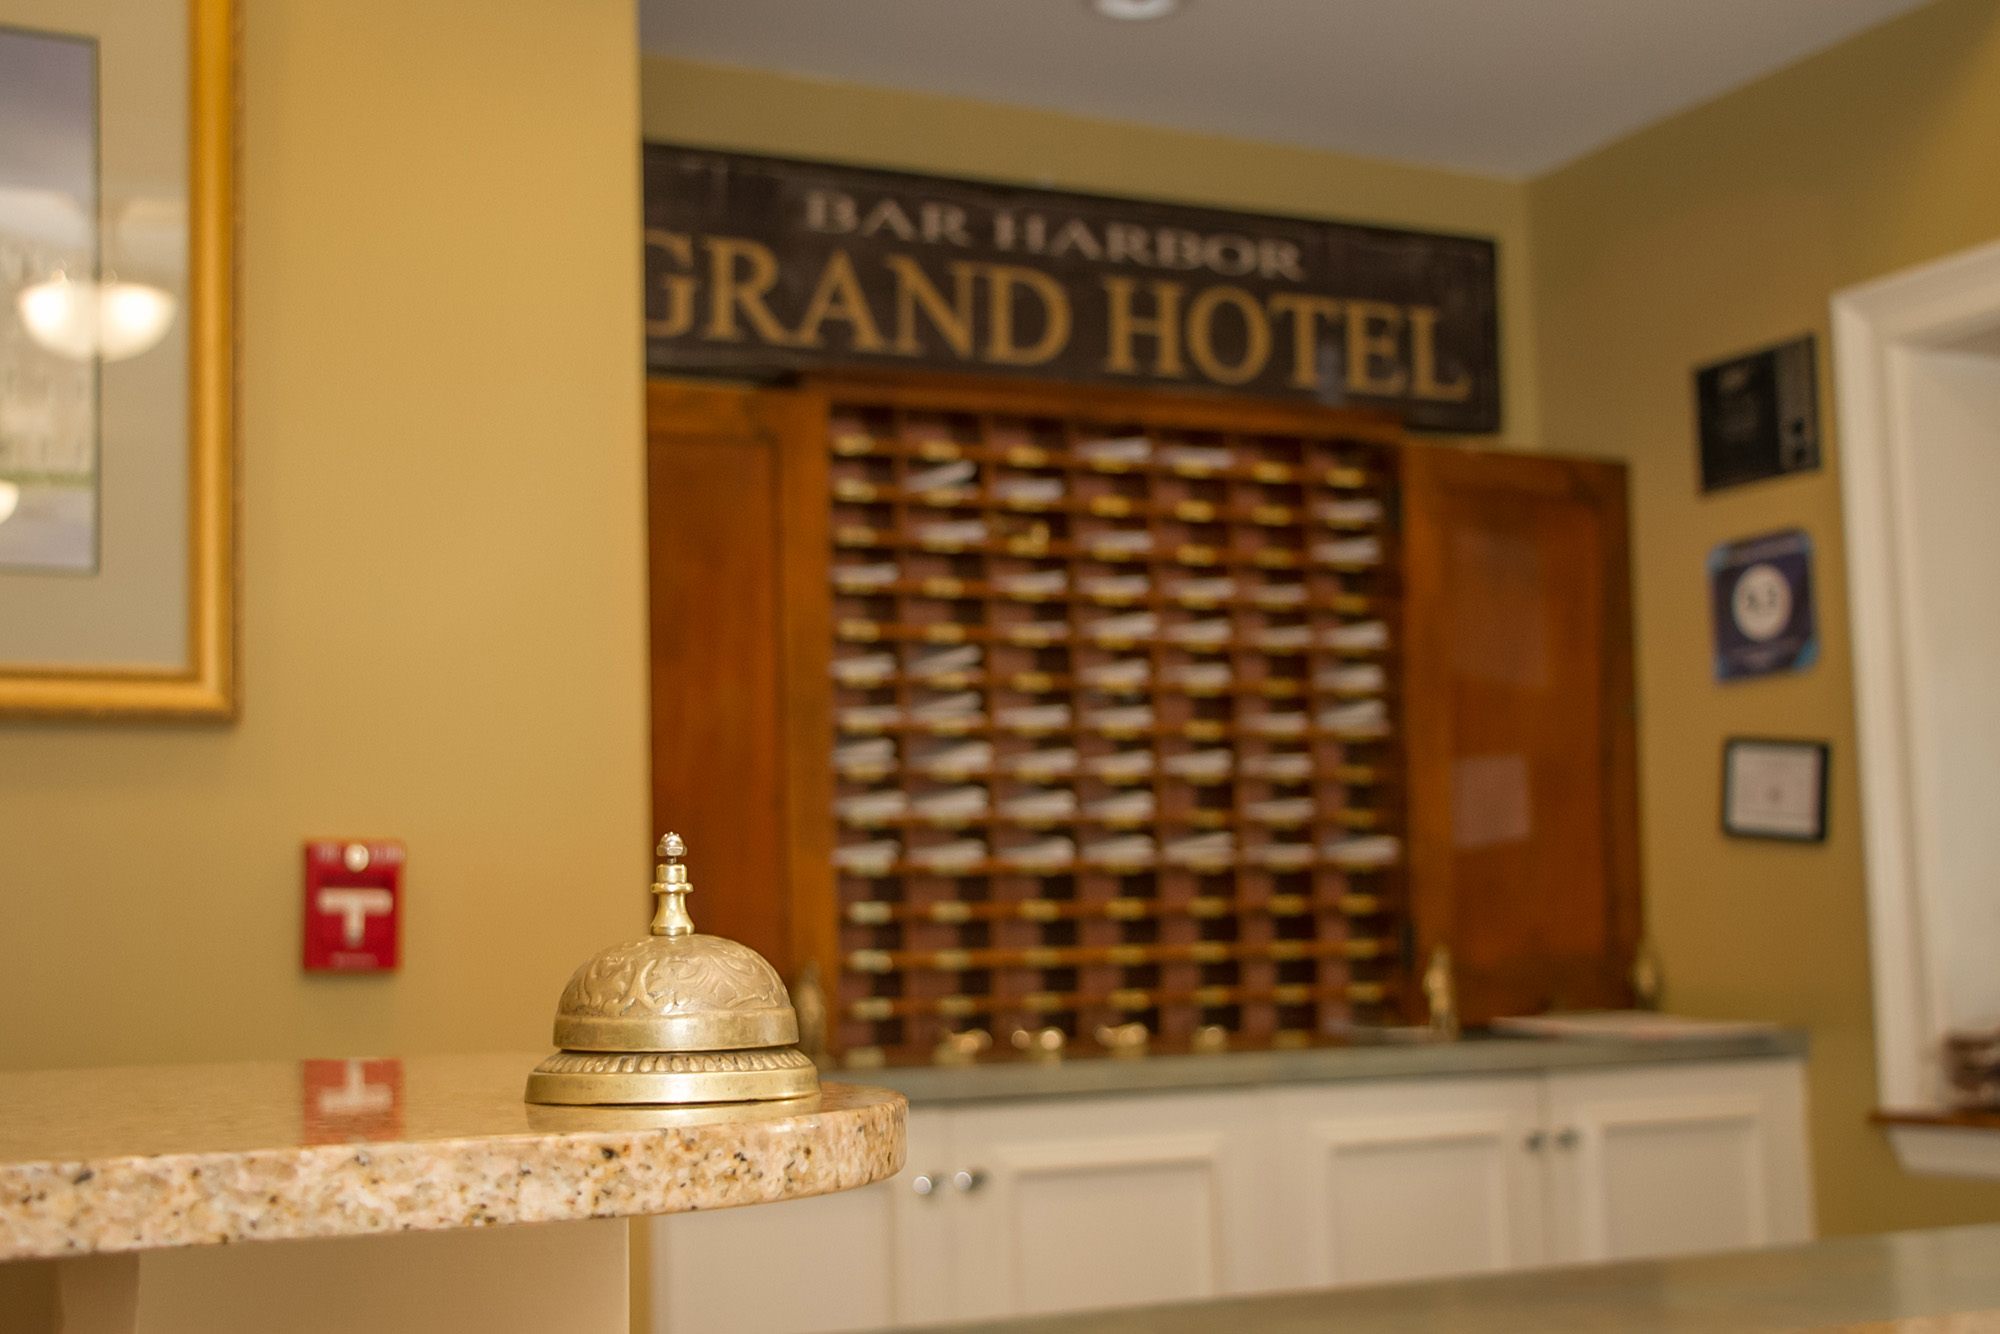 Photo of the front desk at the Bar Harbor Grand